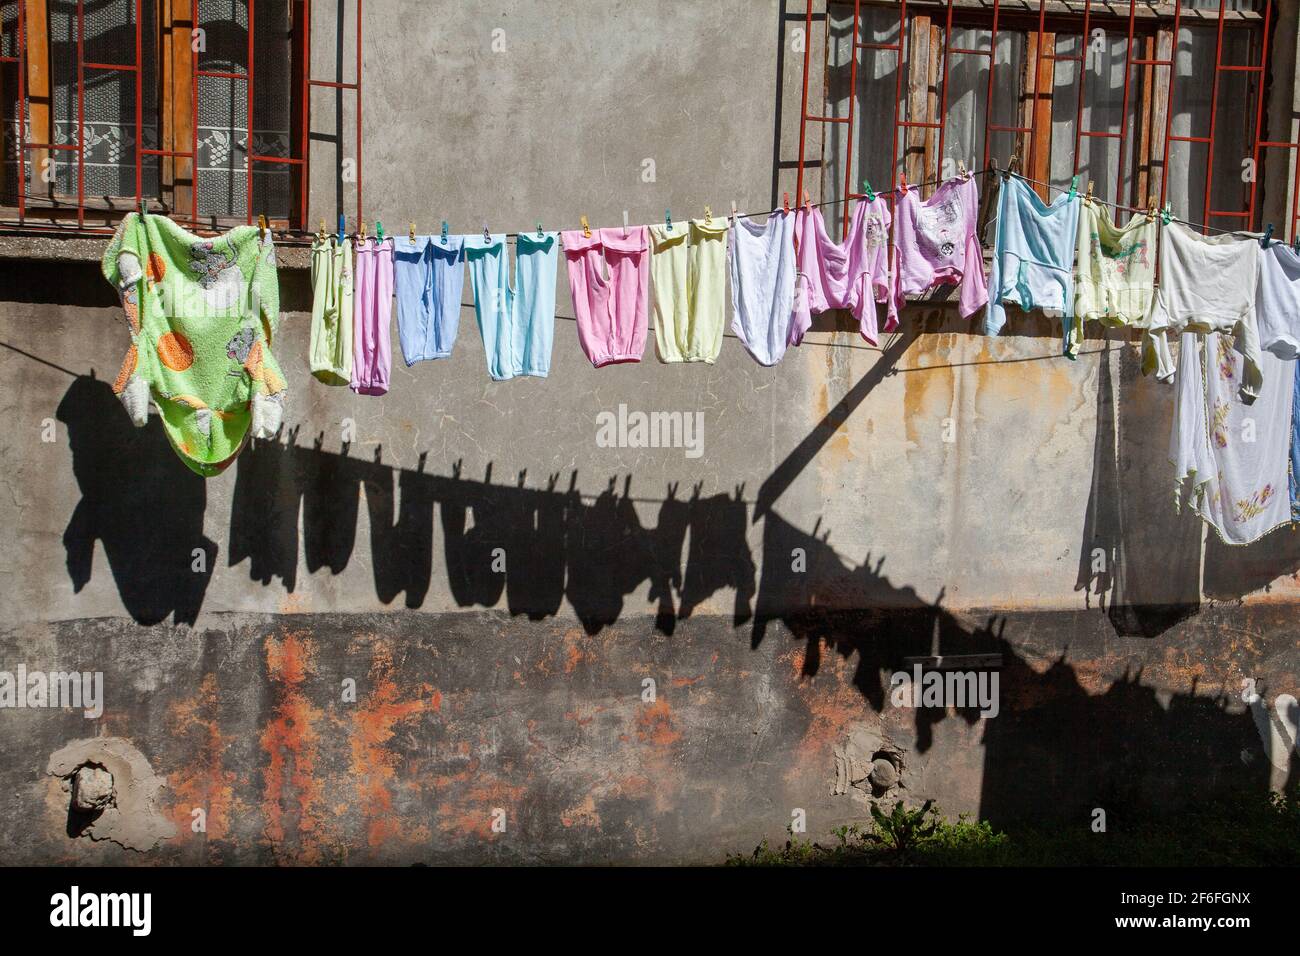 Drying clothes hanging outside the window of an old facade.İstanbul,Turkey Stock Photo